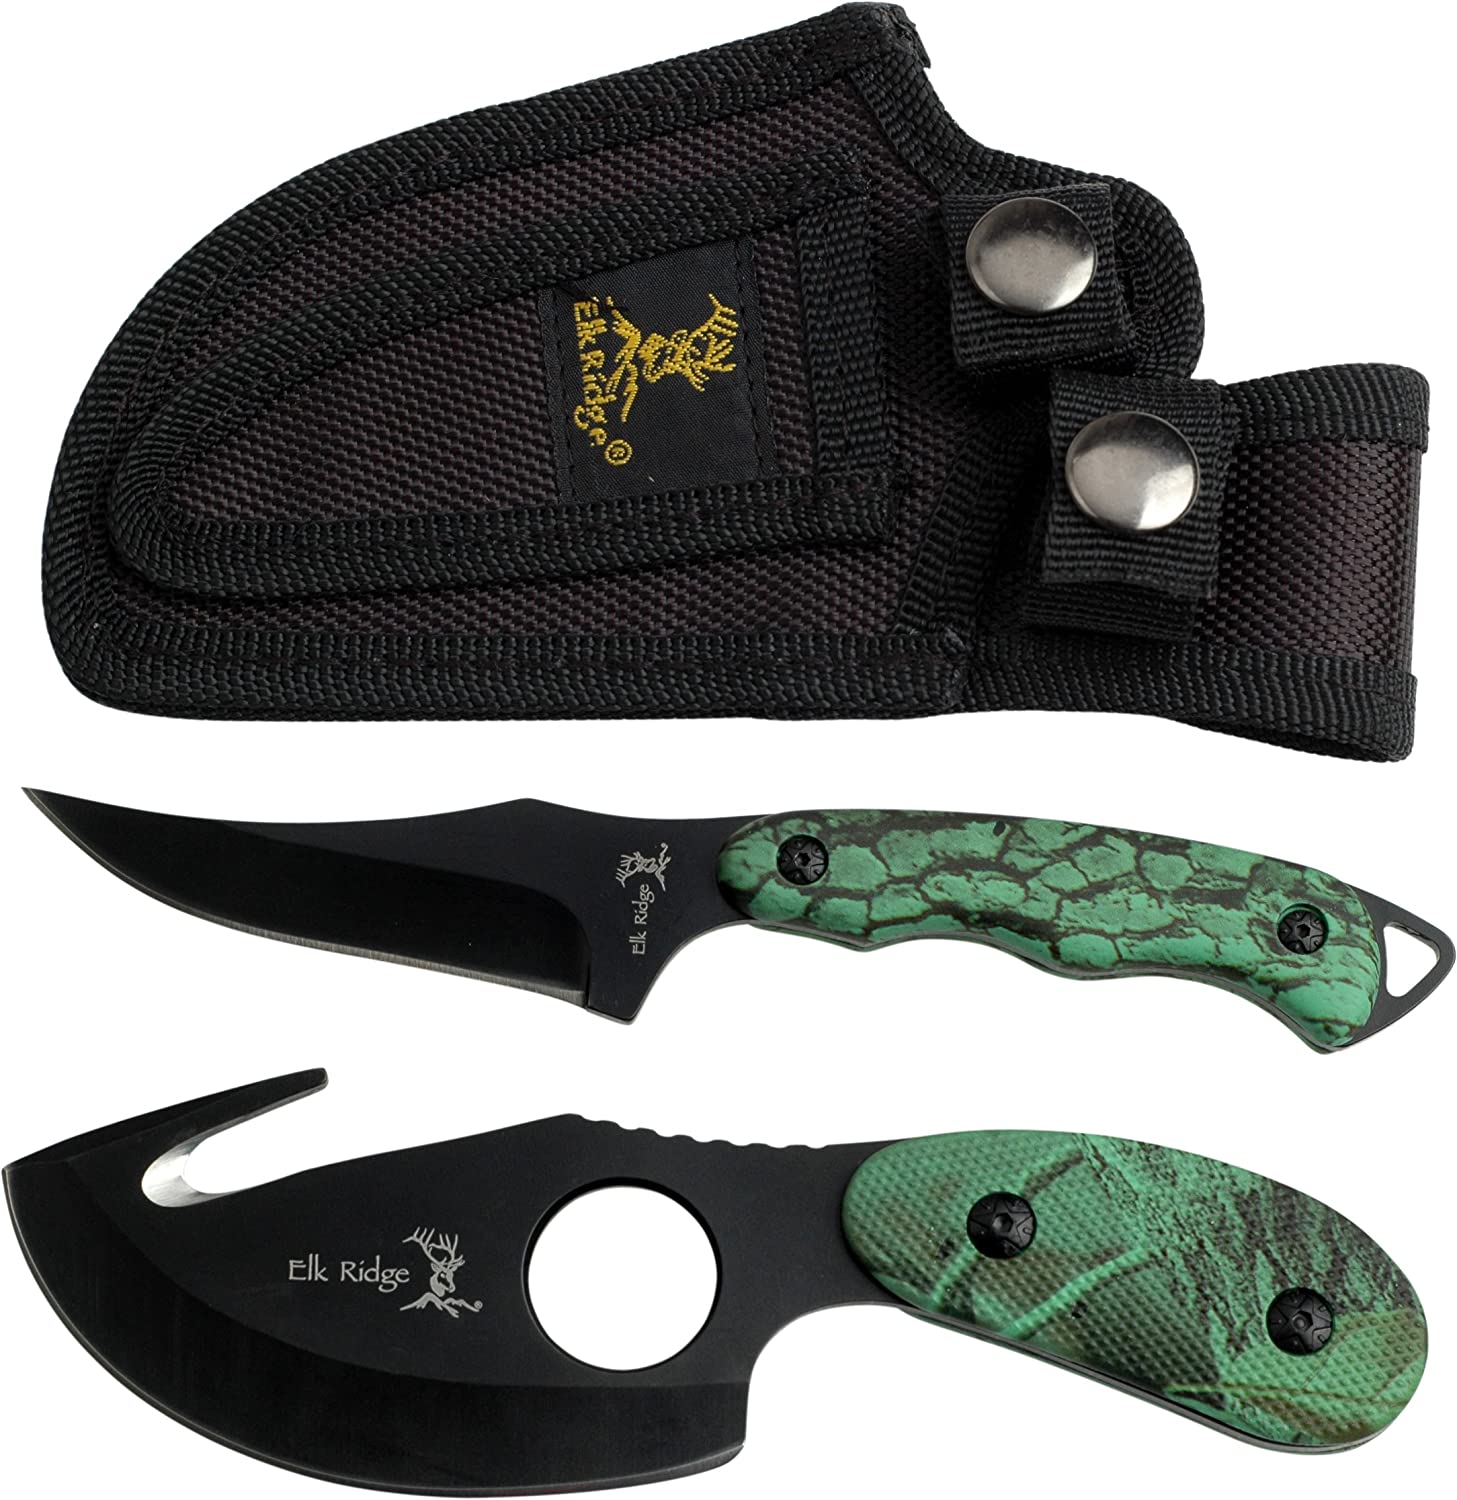 Elk Ridge – Outdoors 2-PC Fixed Blade Hunting Knife Set – Black Stainless Steel Skinner and Gut Hook Blades, Camo Coated Nylon Fiber Handles, Nylon Sheath – Hunting, Camping, Survival – ER-300CA, 7-Inch/6.5-Inch Overall